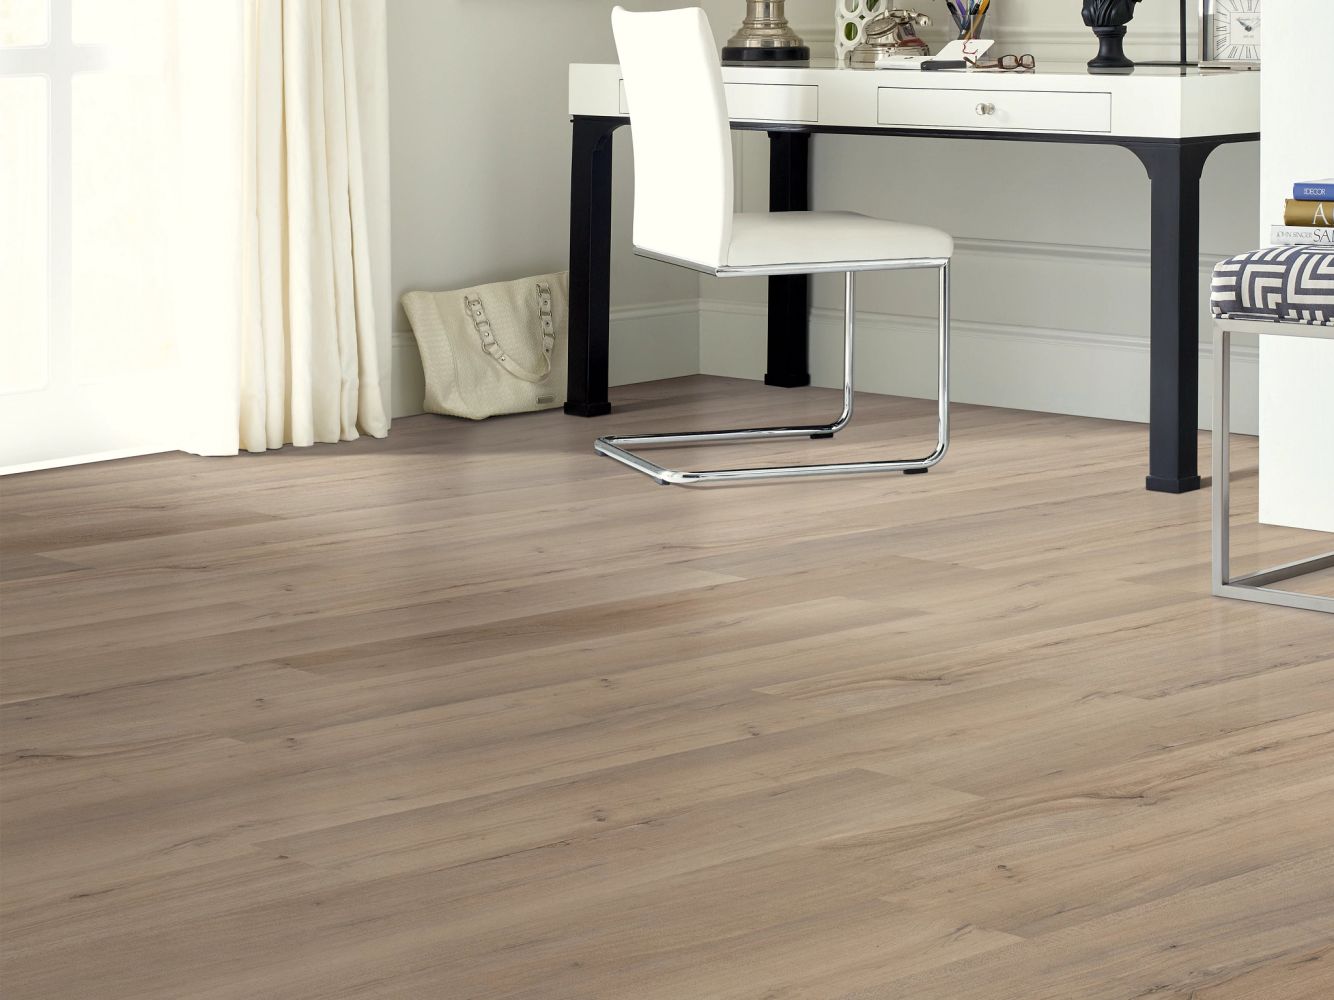 Shaw Floors Resilient Residential Paramount 512c Plus Driftwood 01056_509SA